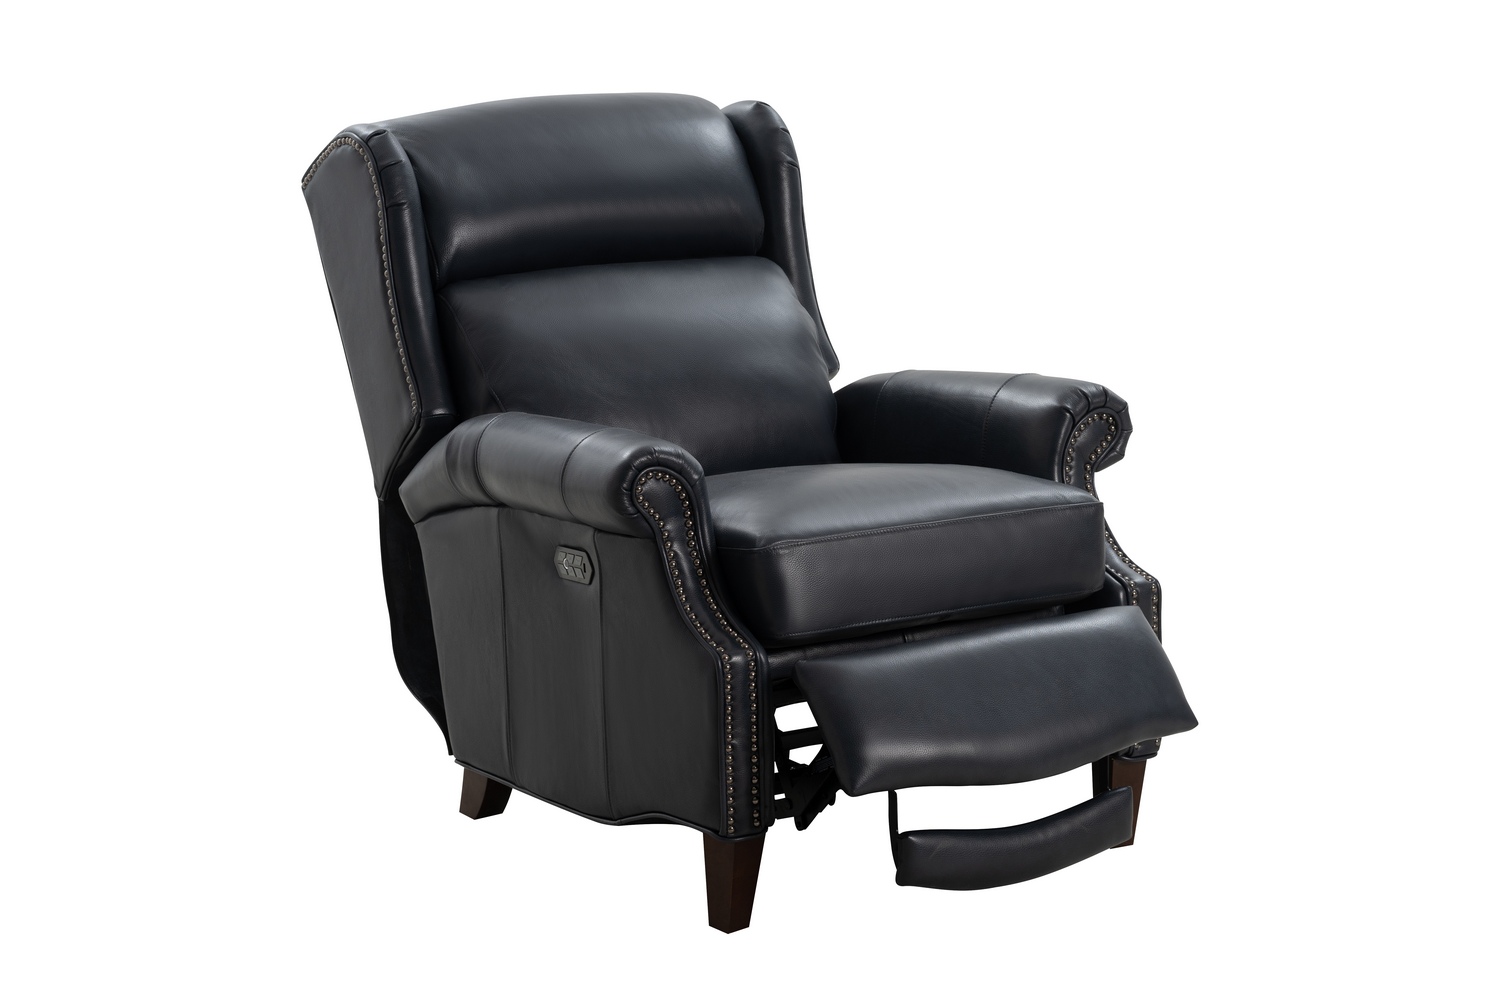 Barcalounger Philadelphia Power Recliner Chair with Power Head Rest and Lumbar - Barone Navy Blue/All Leather